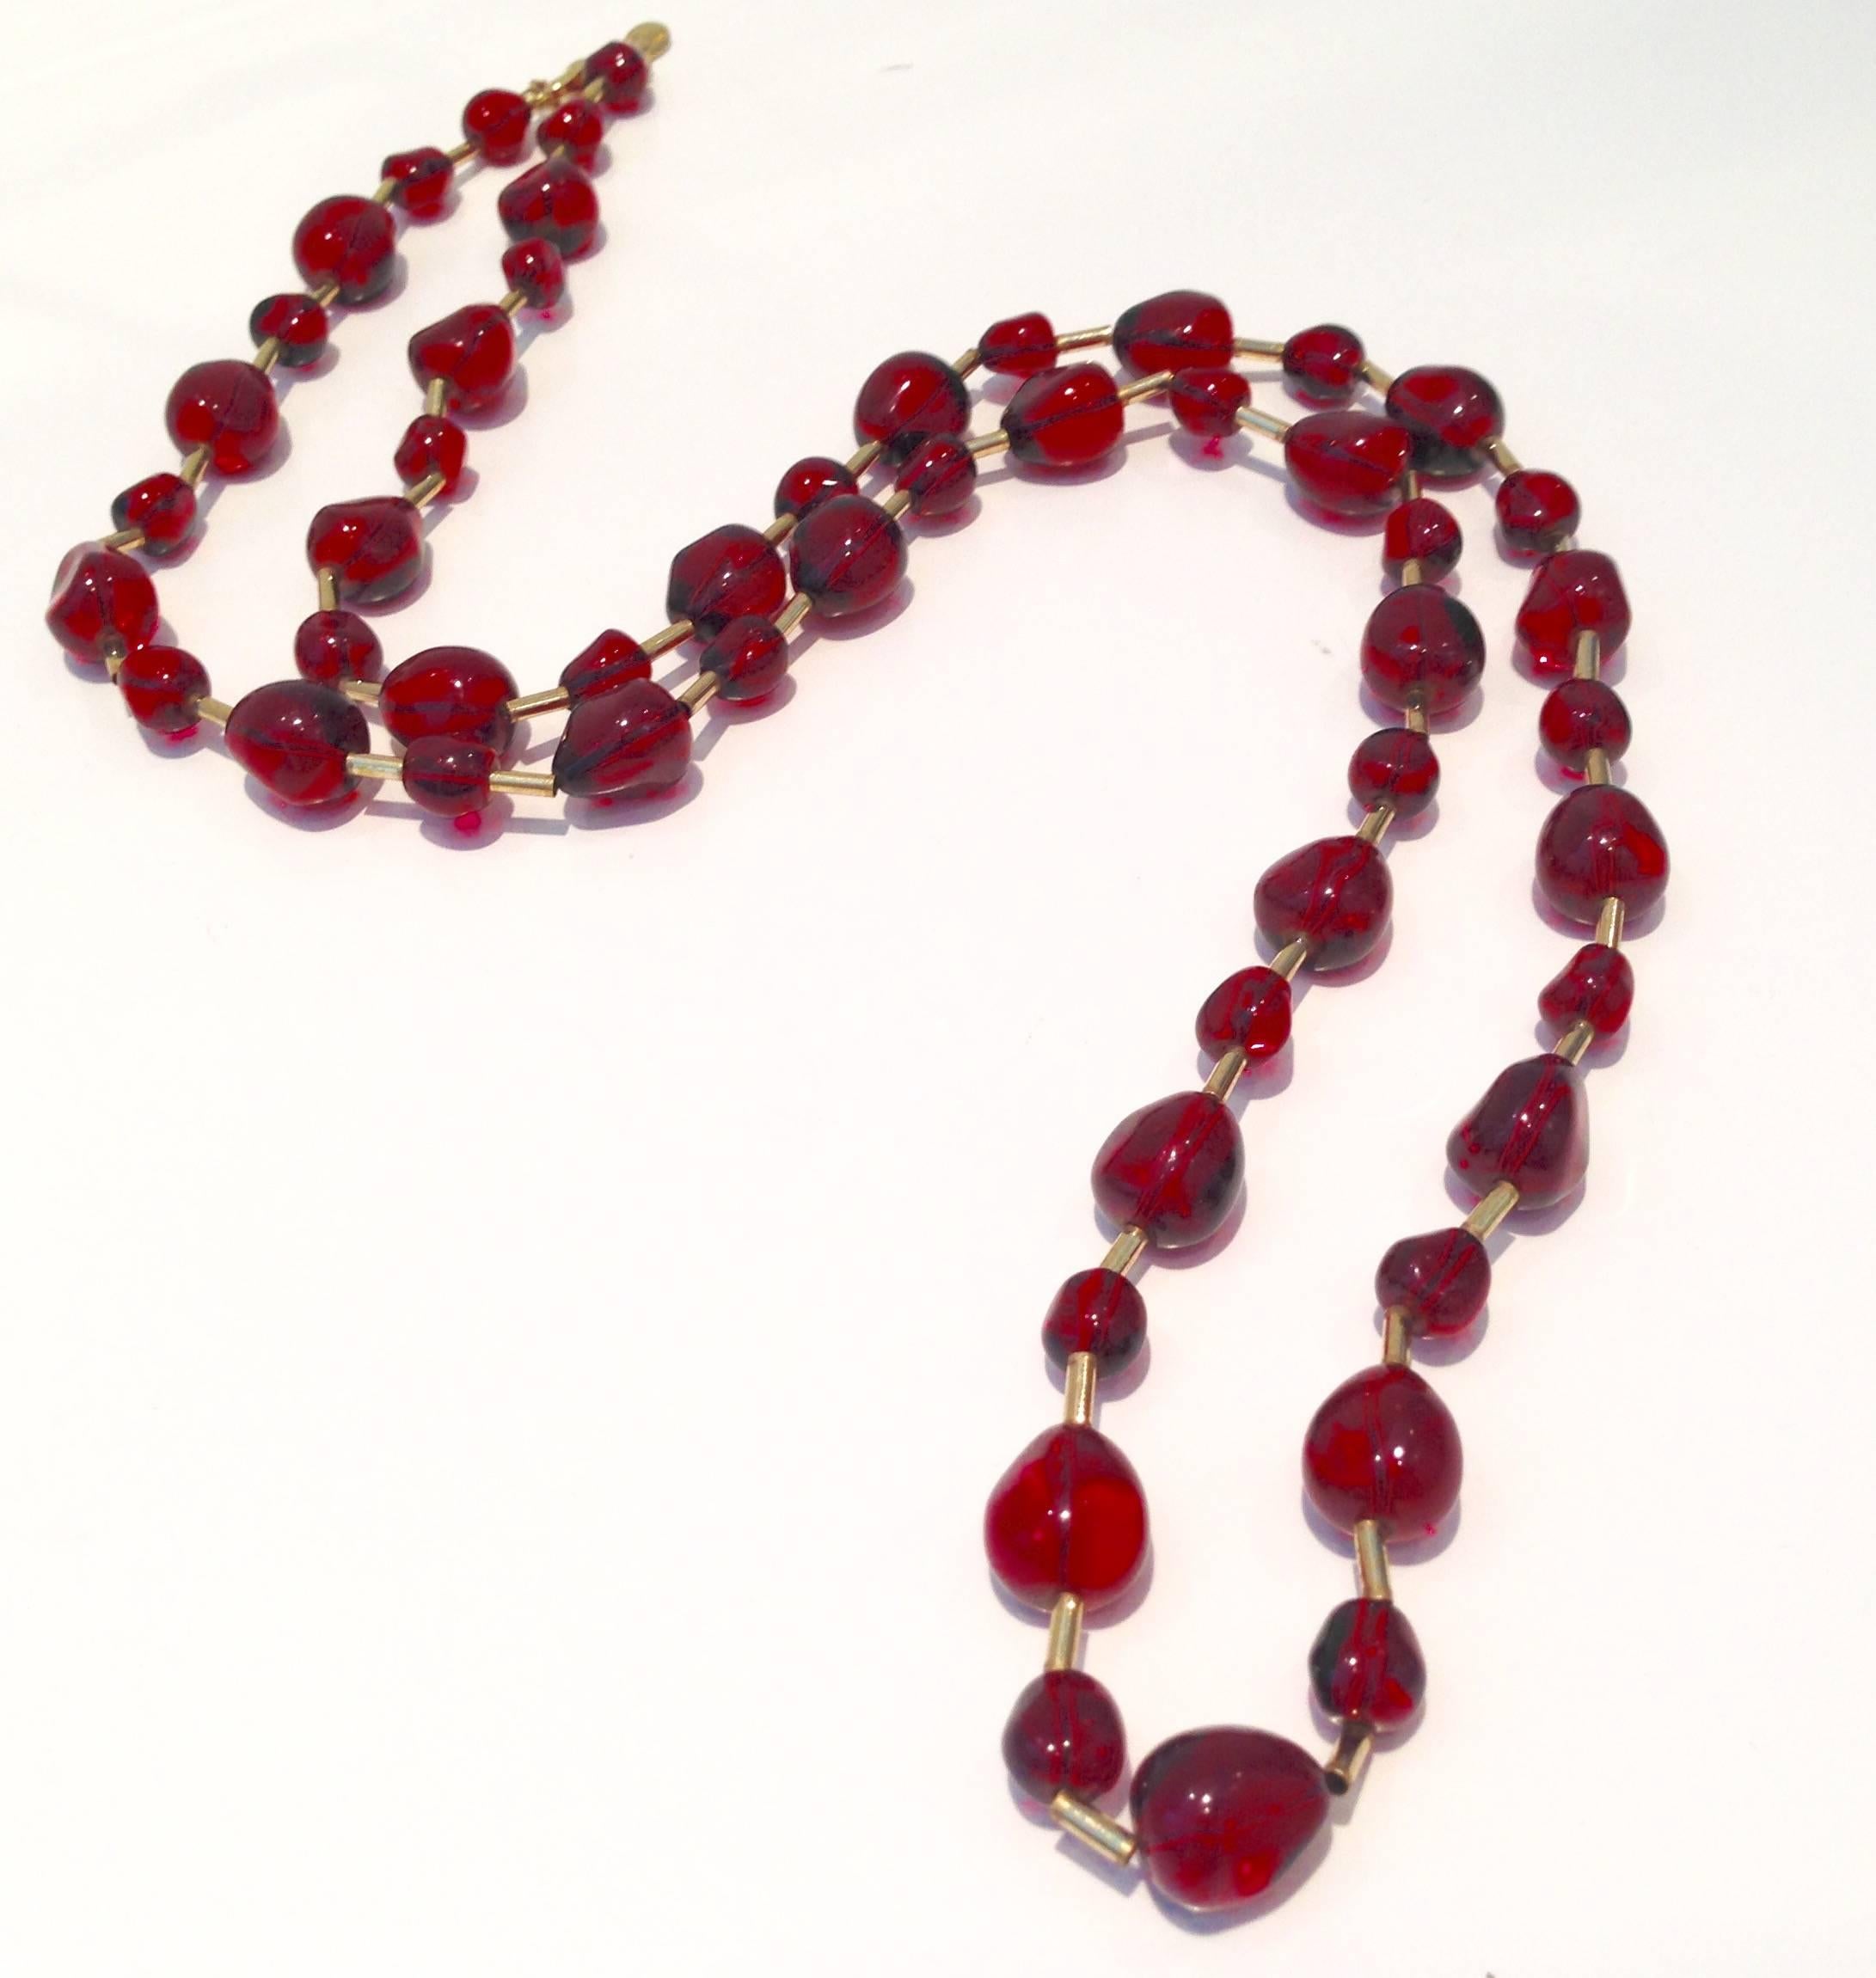 Organic Modern KJL Opera Length Ruby Red Bead and Gold Plate Necklace, Signed